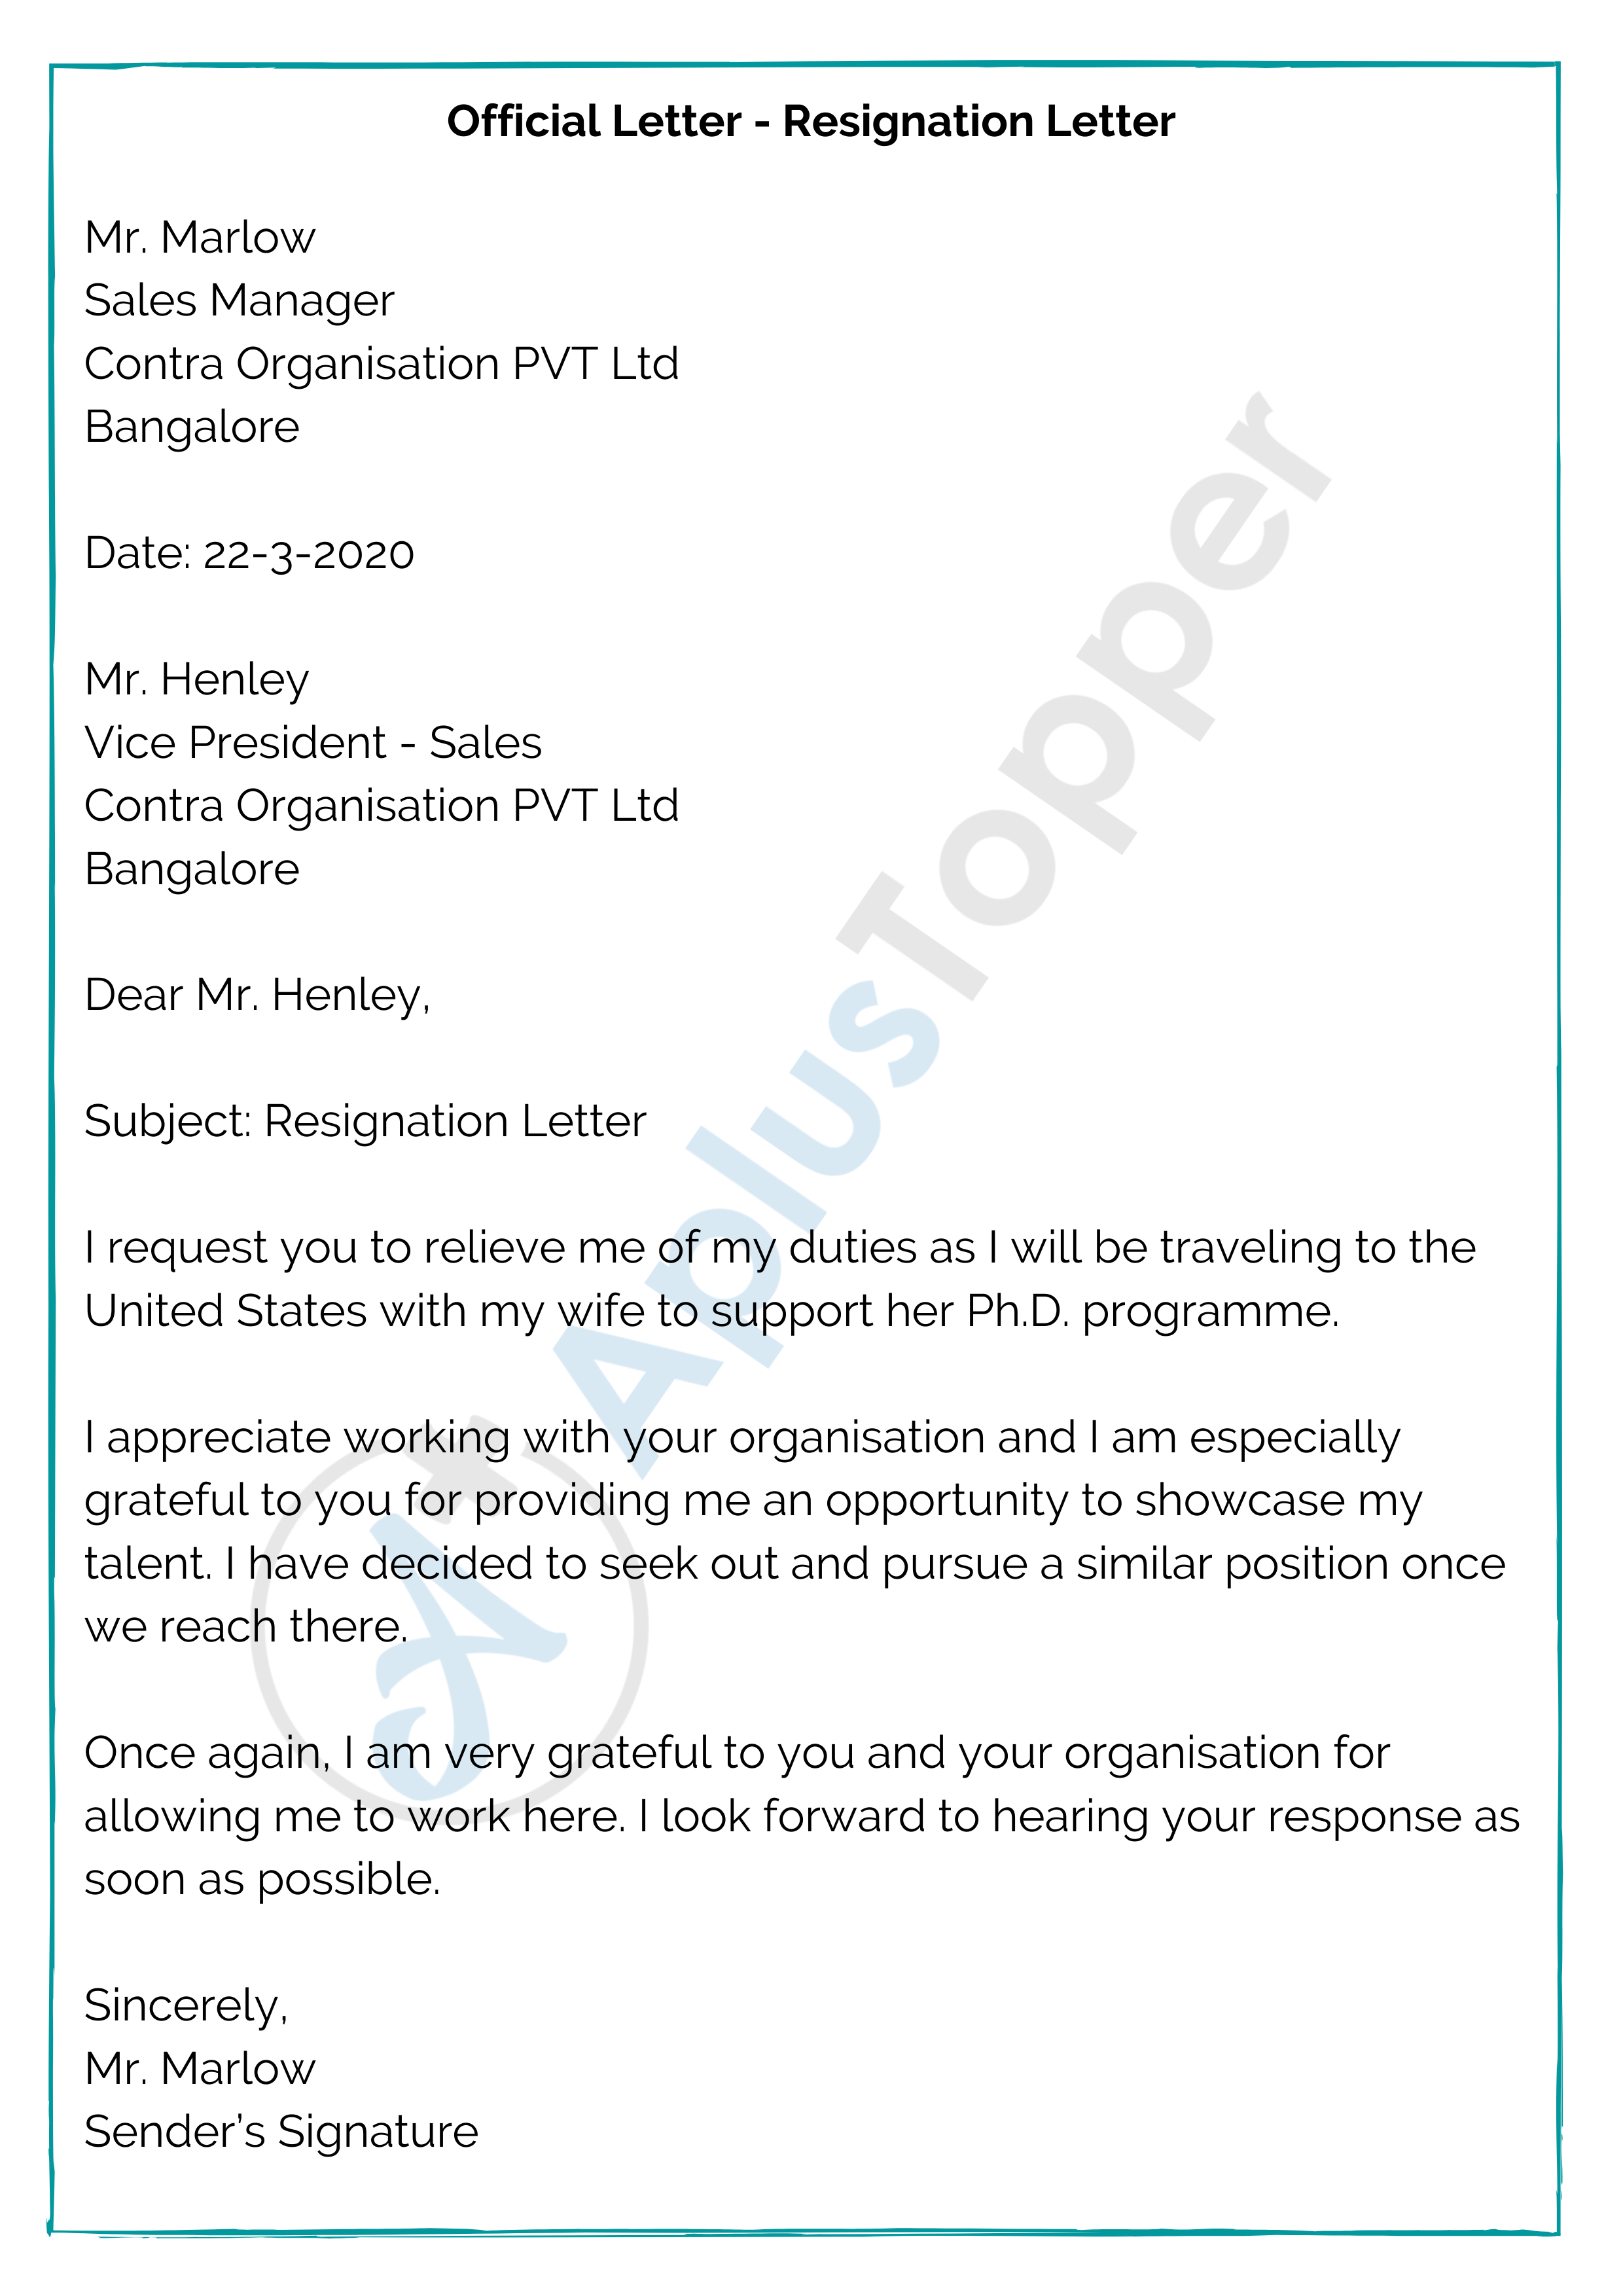 Official Letter | Samples, Format, How To Write an Official Letter? - A  Plus Topper